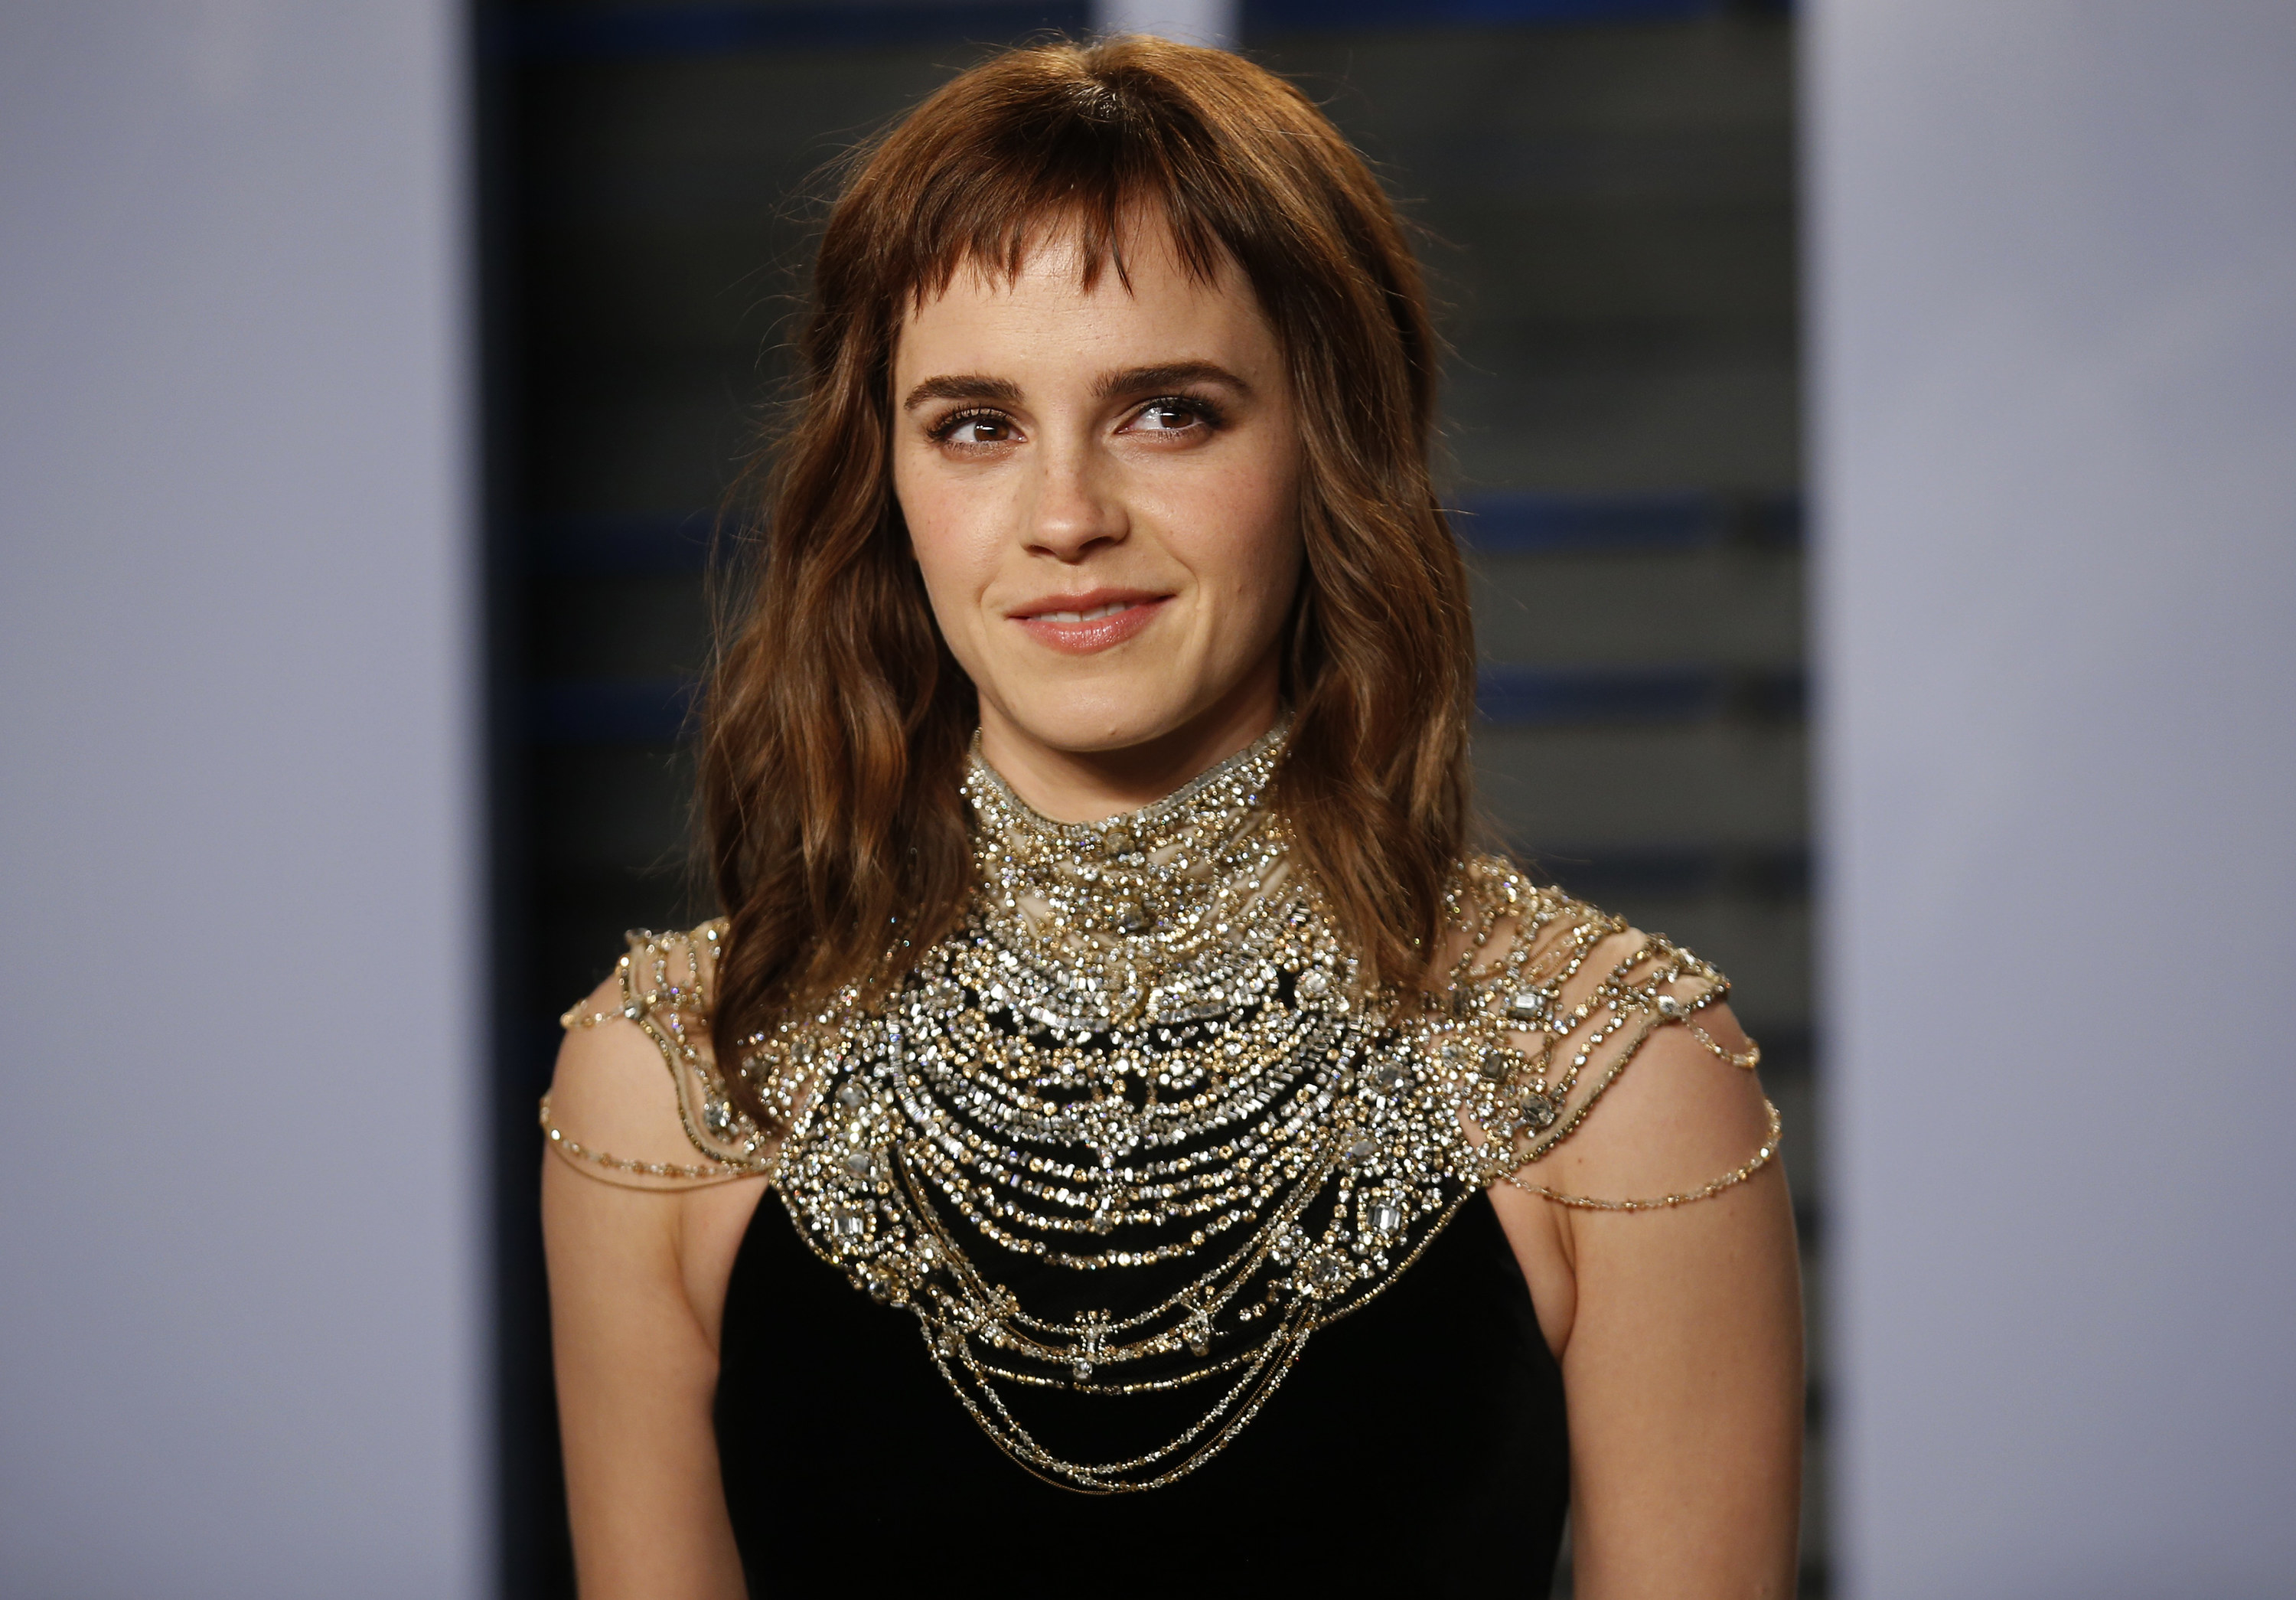 Close-up of Emma in an elaborate necklace and halter top